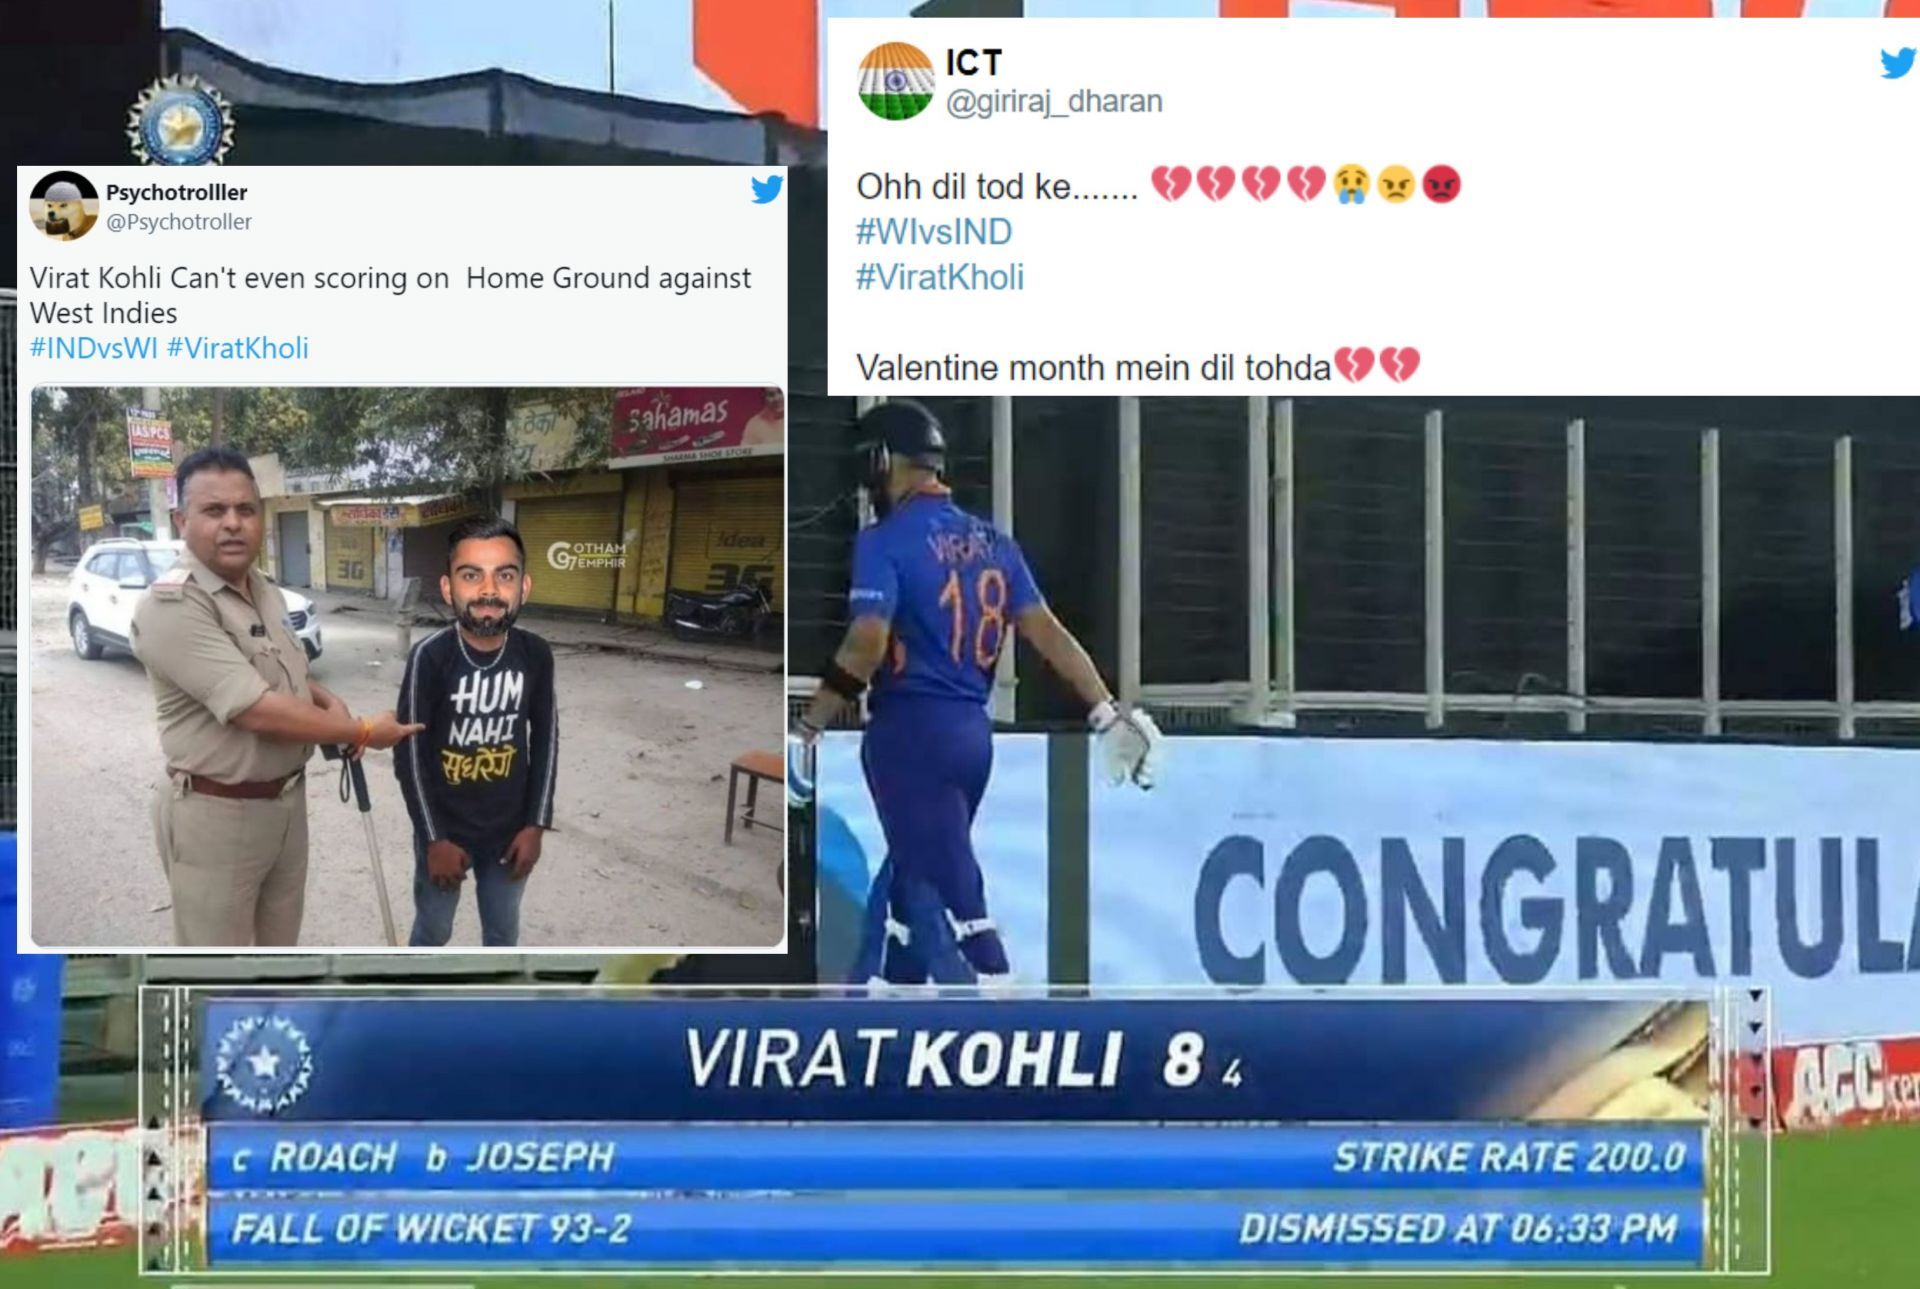 Fans are disappointed as Virat Kohli departs after a hasty 8-run knock against West Indies